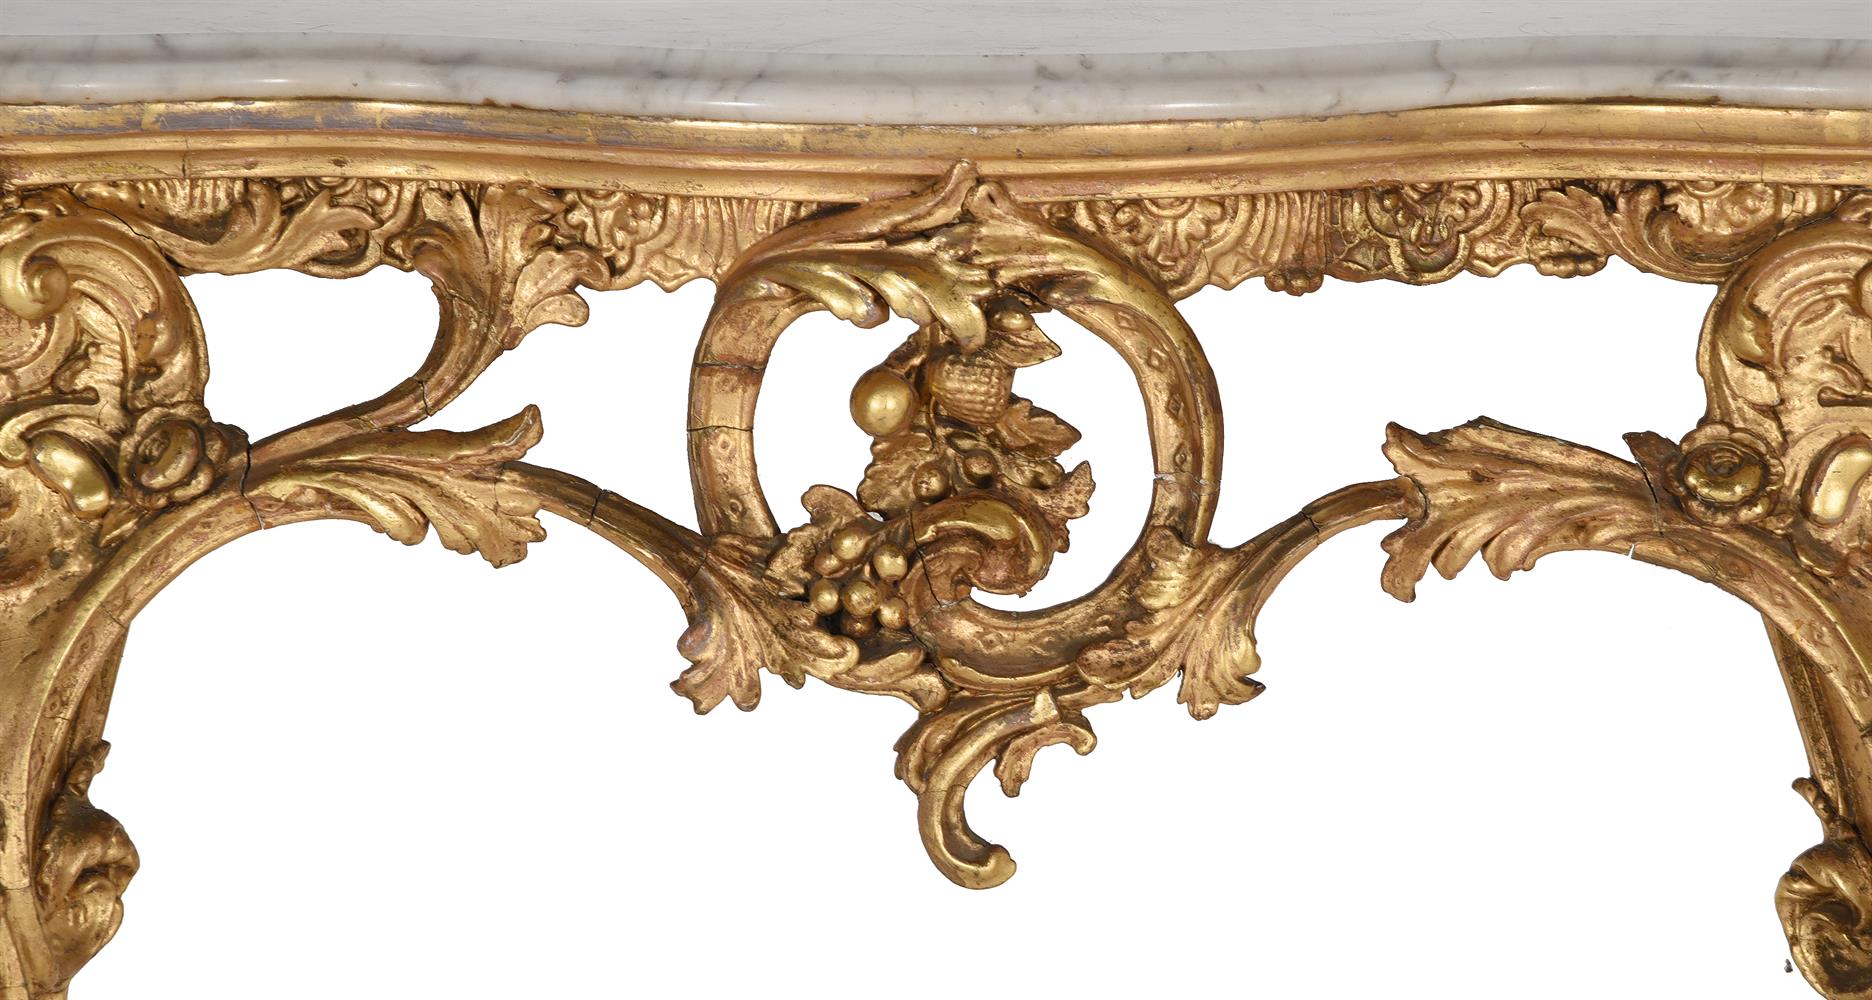 A PAIR OF LOUIS XV STYLE GILTWOOD AND GESSO CONSOLE TABLES, FIRST HALF 19TH CENTURY - Image 4 of 13